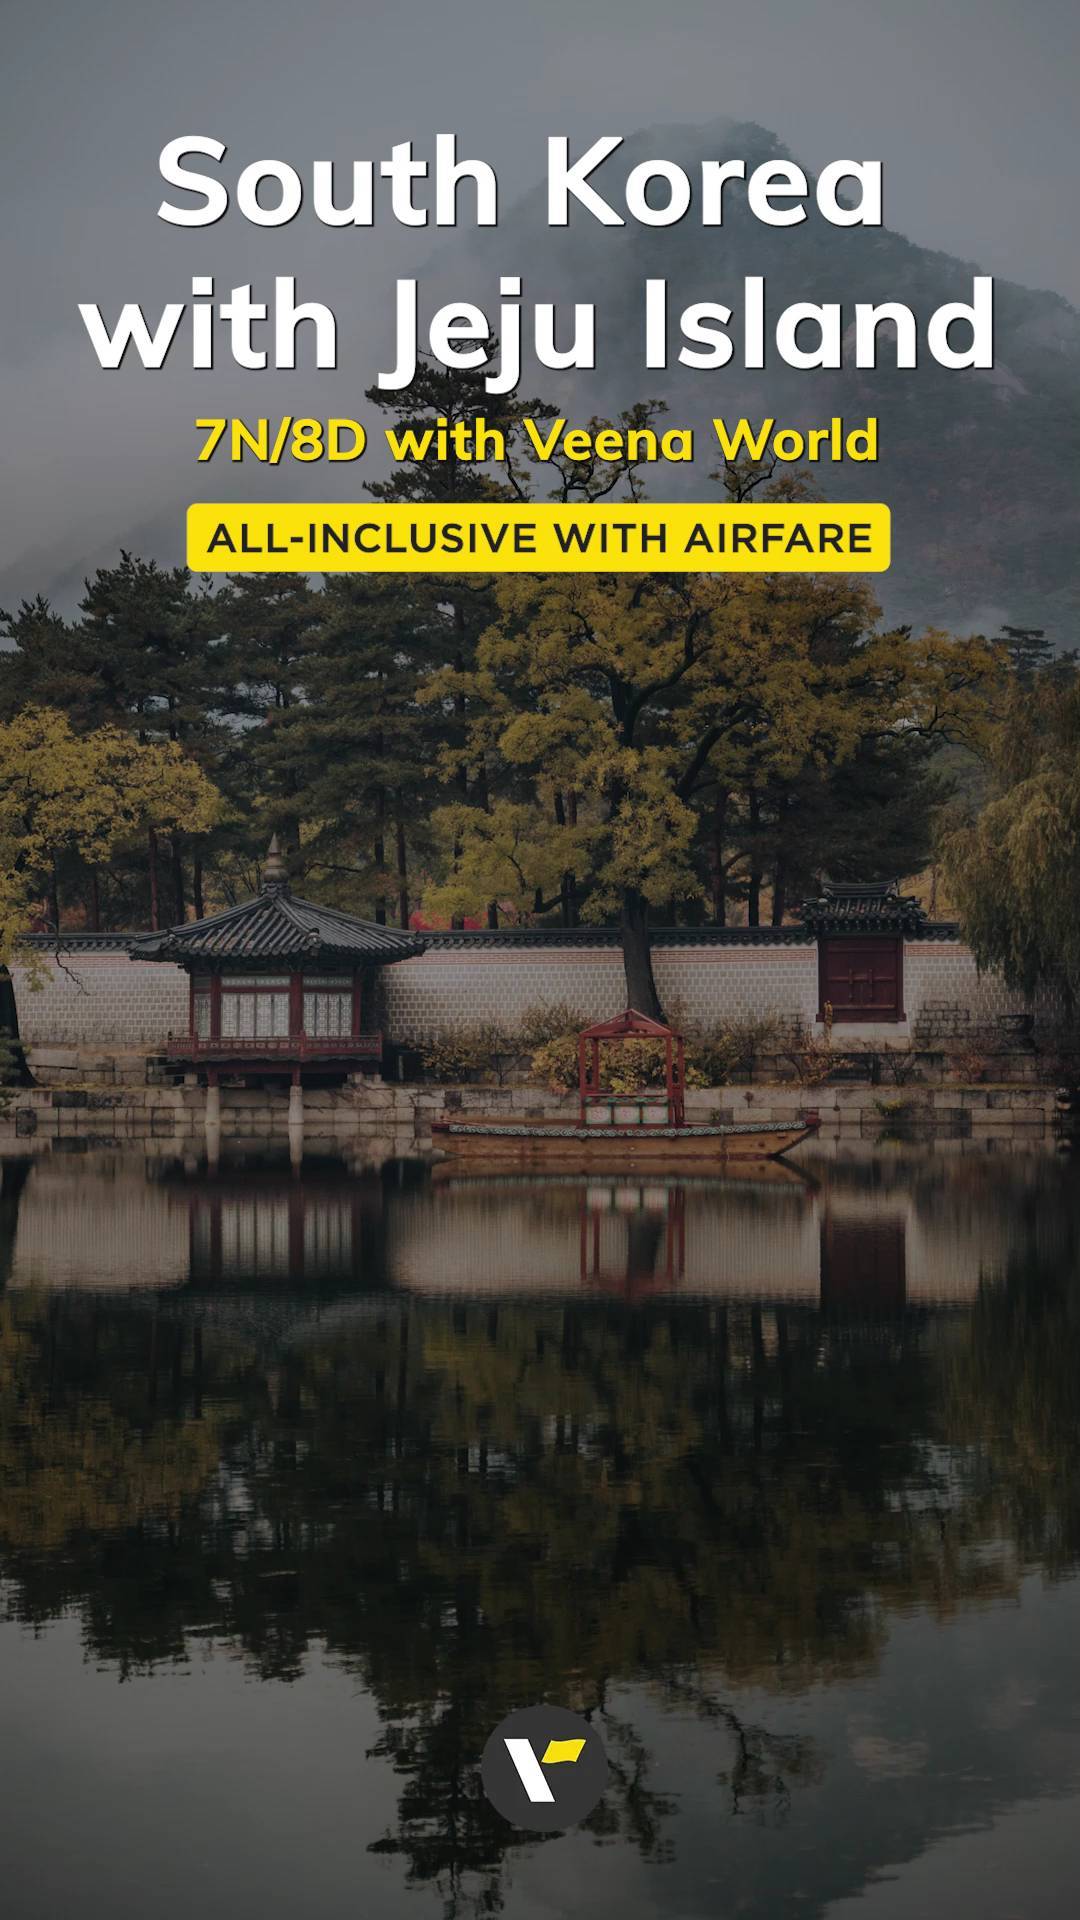 Annyeonghaseyo! We know that after all watching all those K-dramas, you sure want to travel to South Korea and experience this marvellous country. Veena World is here to make your Korean travel dreams come true.For more details, get in touch with us on 1800 22 7979/travel@veenaworld.com#SouthKorea #VeenaWorld